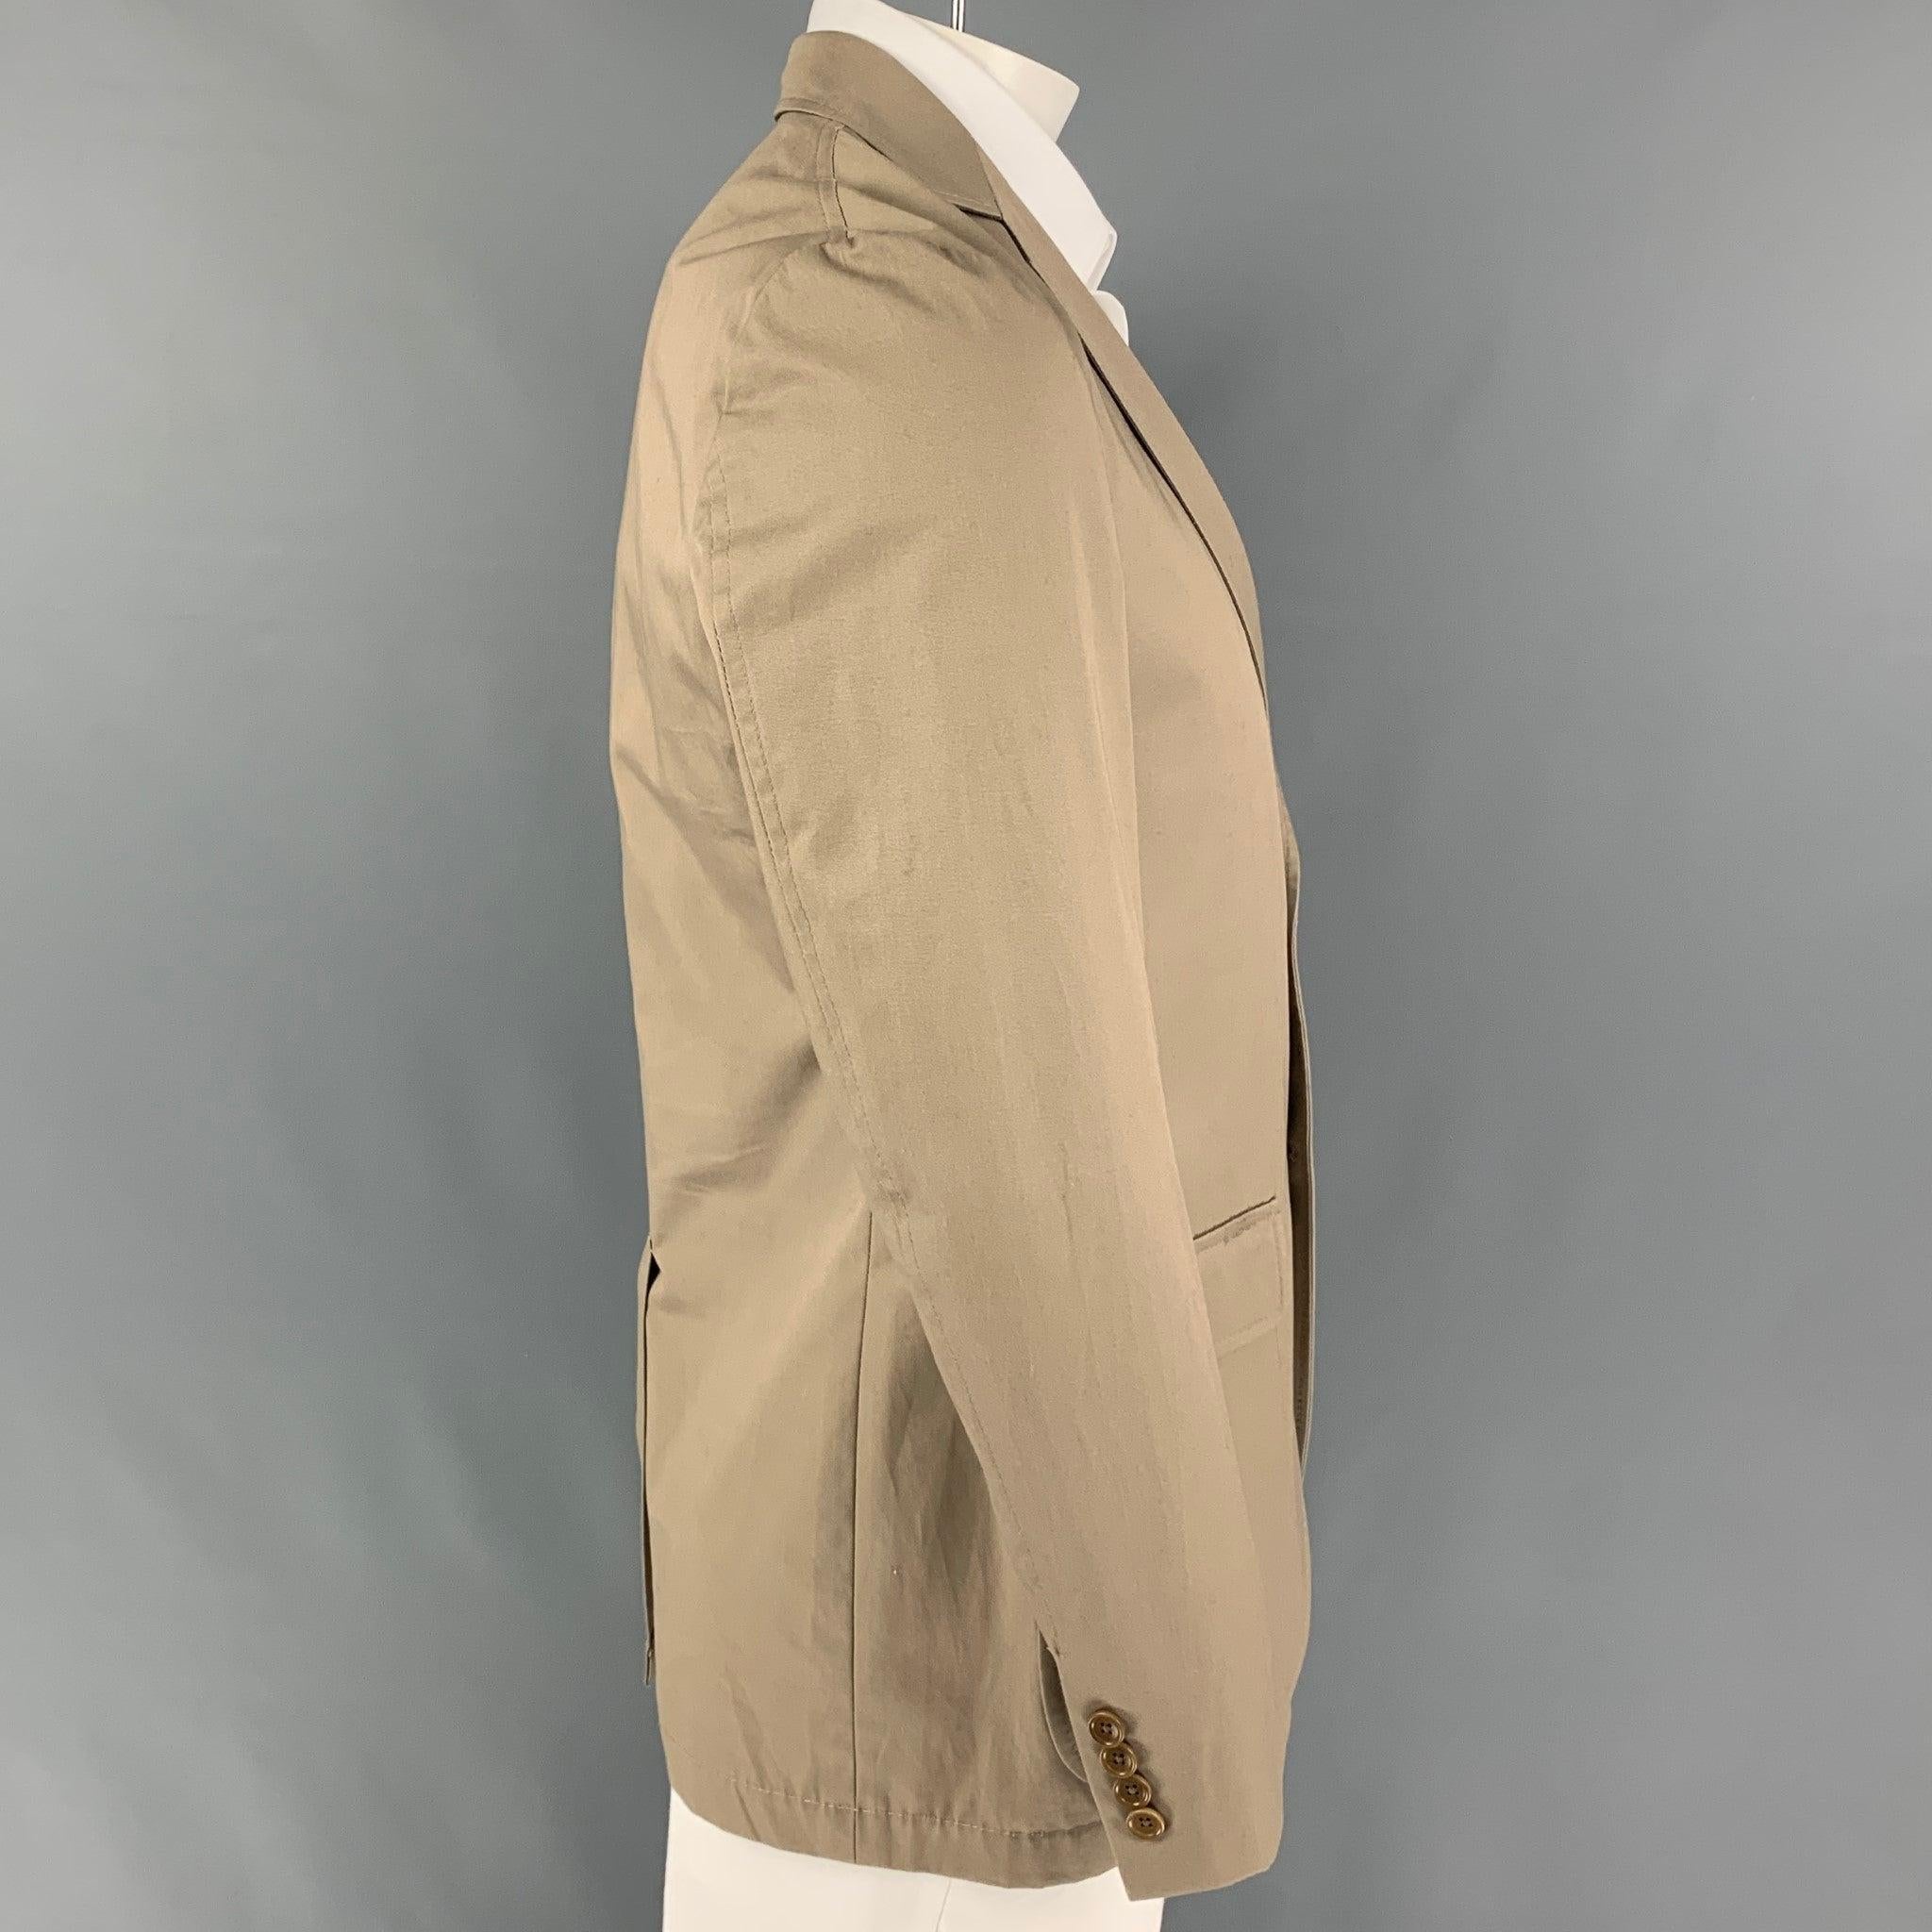 GITMAN BROS for UNIONMADE sport coat comes in a khaki cotton with a half liner featuring a notch lapel, flap pockets, single back vent, and a three button closure.
Very Good
Pre-Owned Condition. 

Marked:   40 

Measurements: 
 
Shoulder: 18 inches